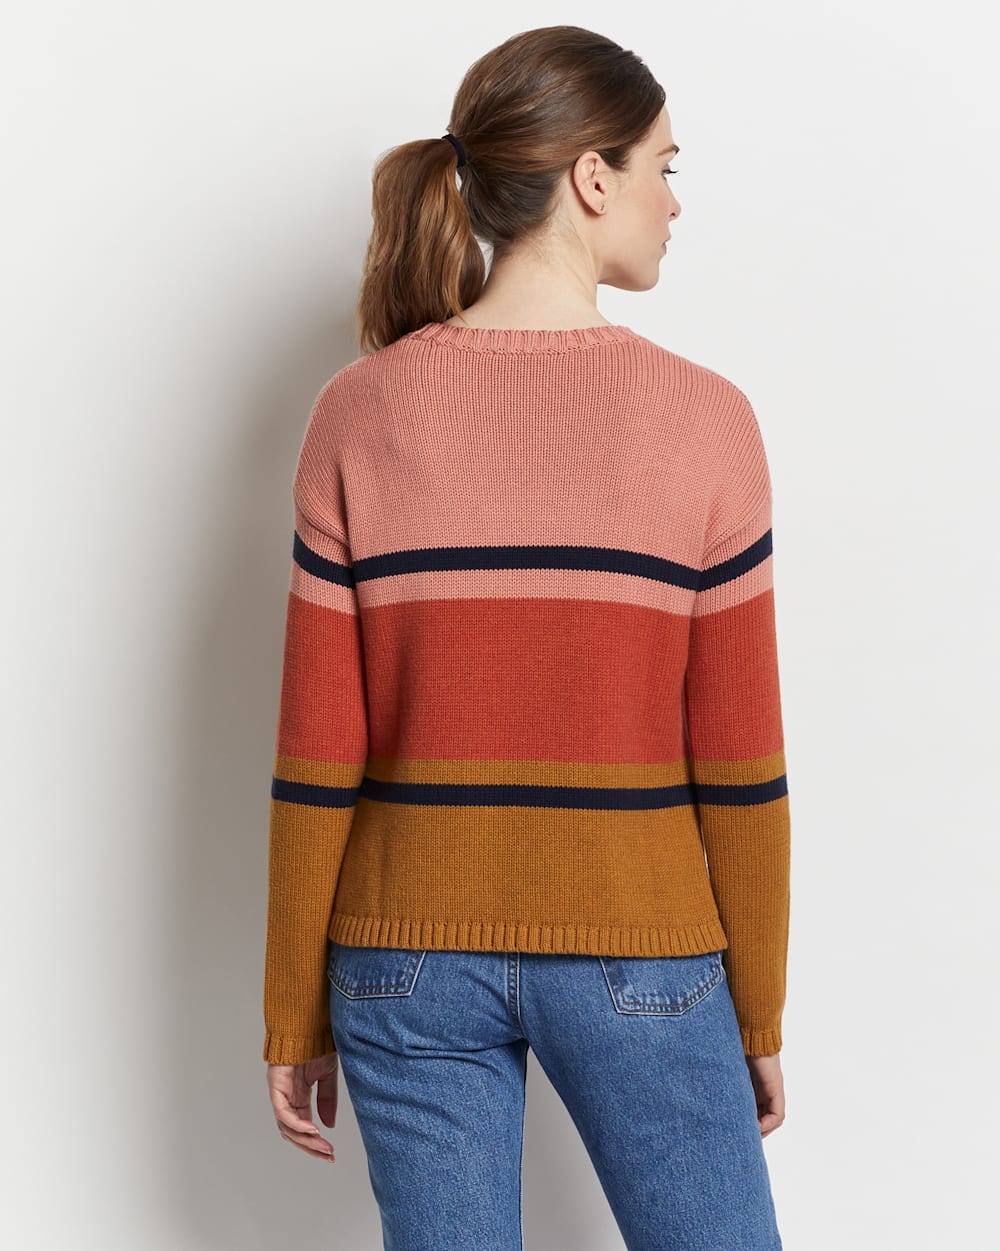 ALTERNATE VIEW OF WOMEN'S RELAXED-FIT STRIPE PULLOVER IN PEANUT/CORAL MULTI image number 2